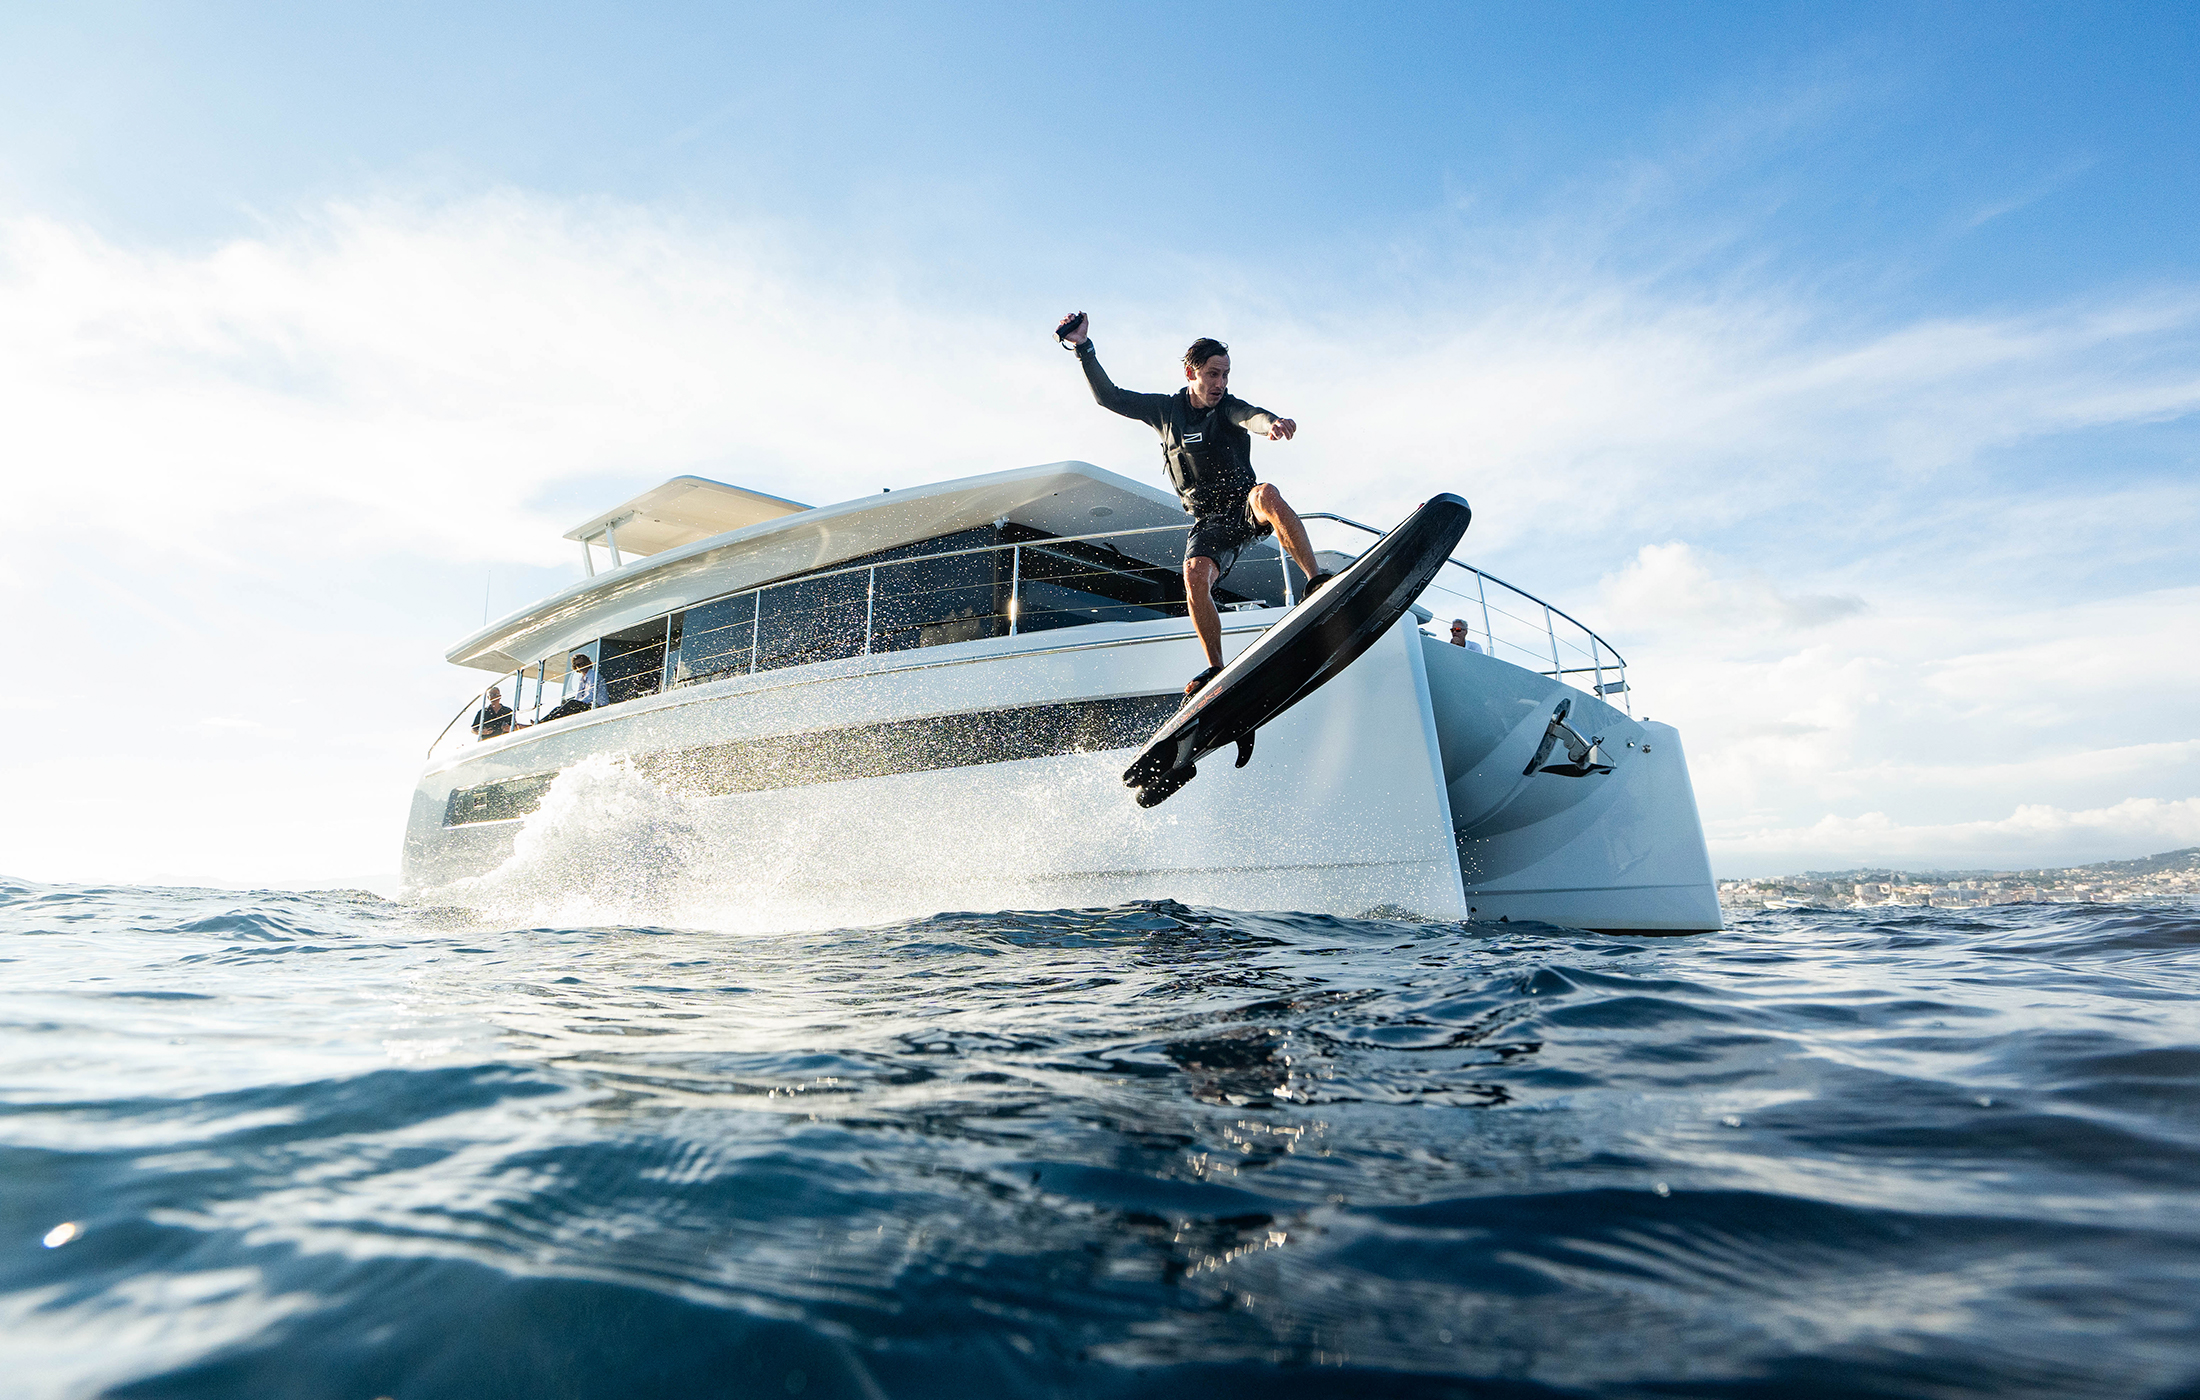 Man jumping with the Awake water toy in front of a Silent yacht